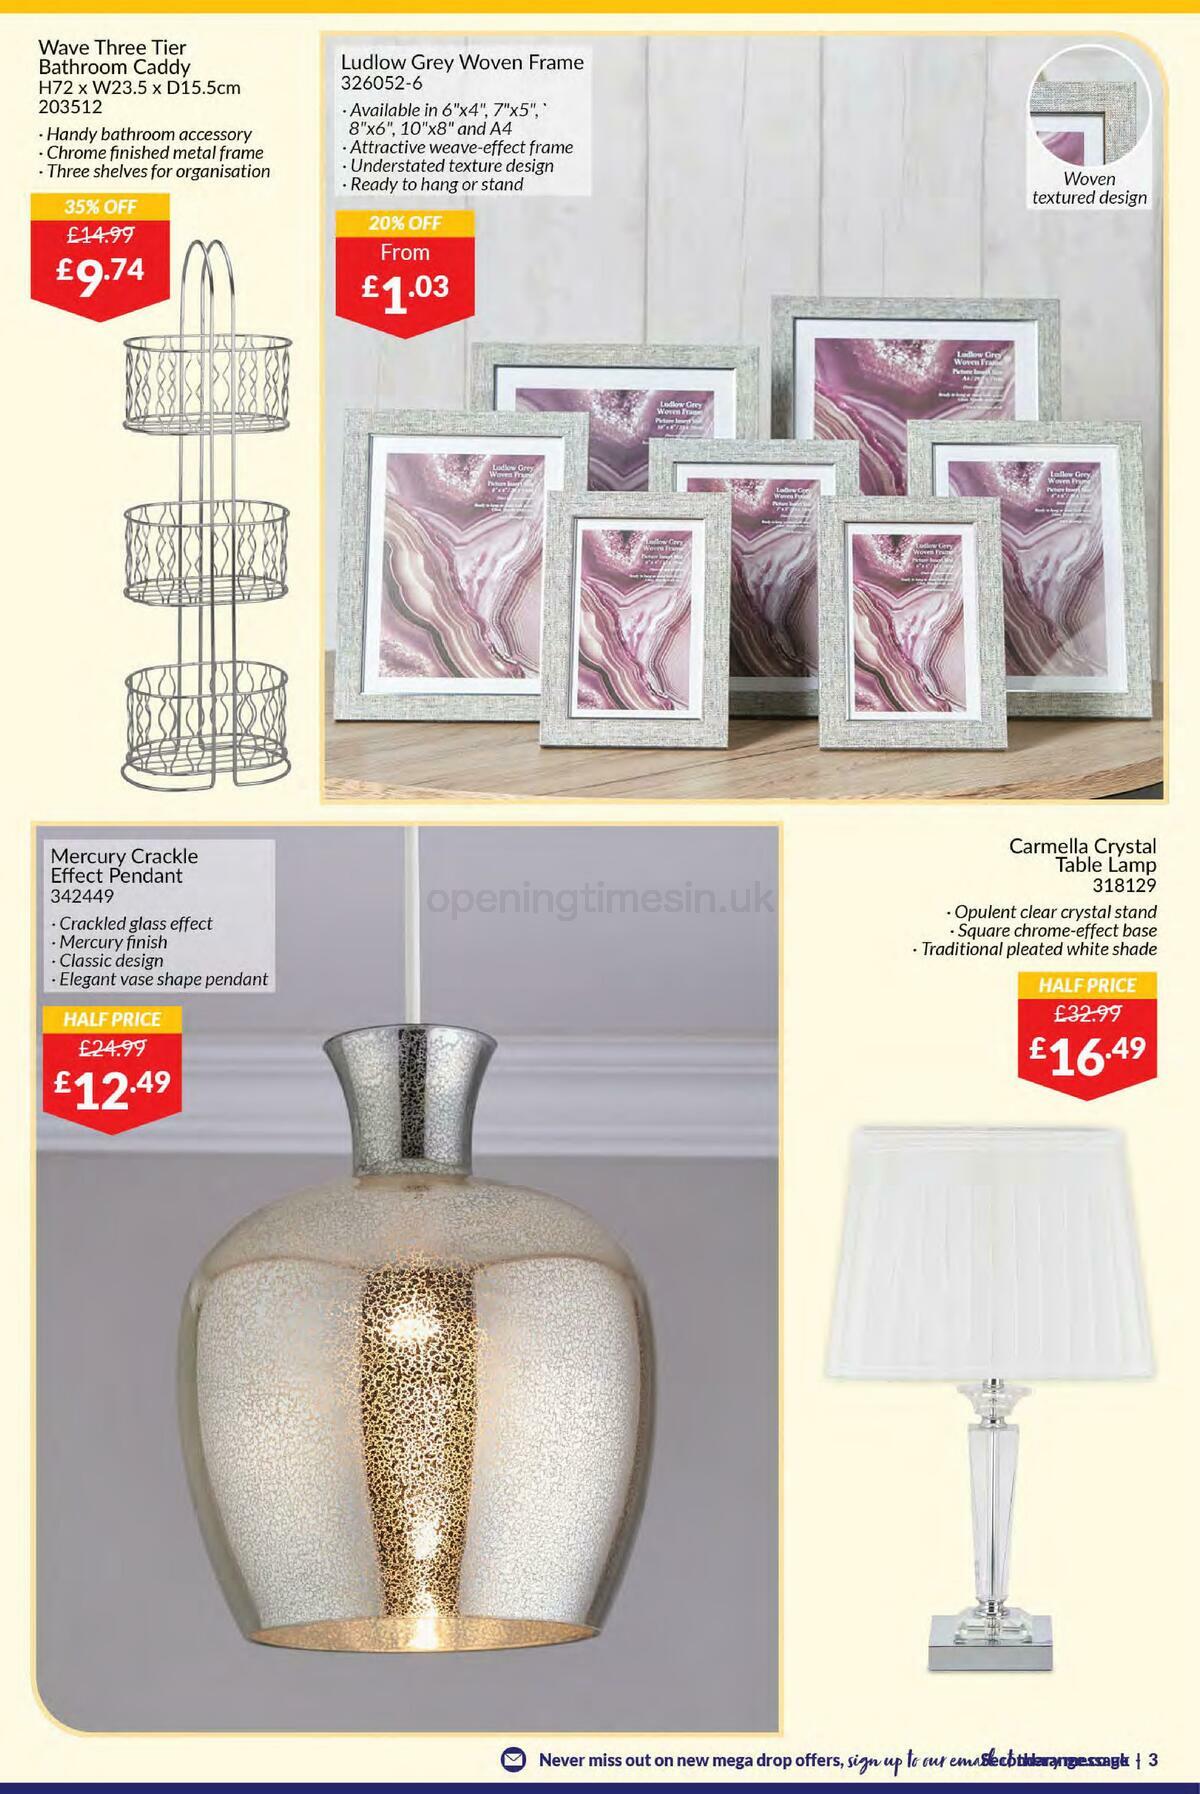 The Range Home Edit Offers from 26 August